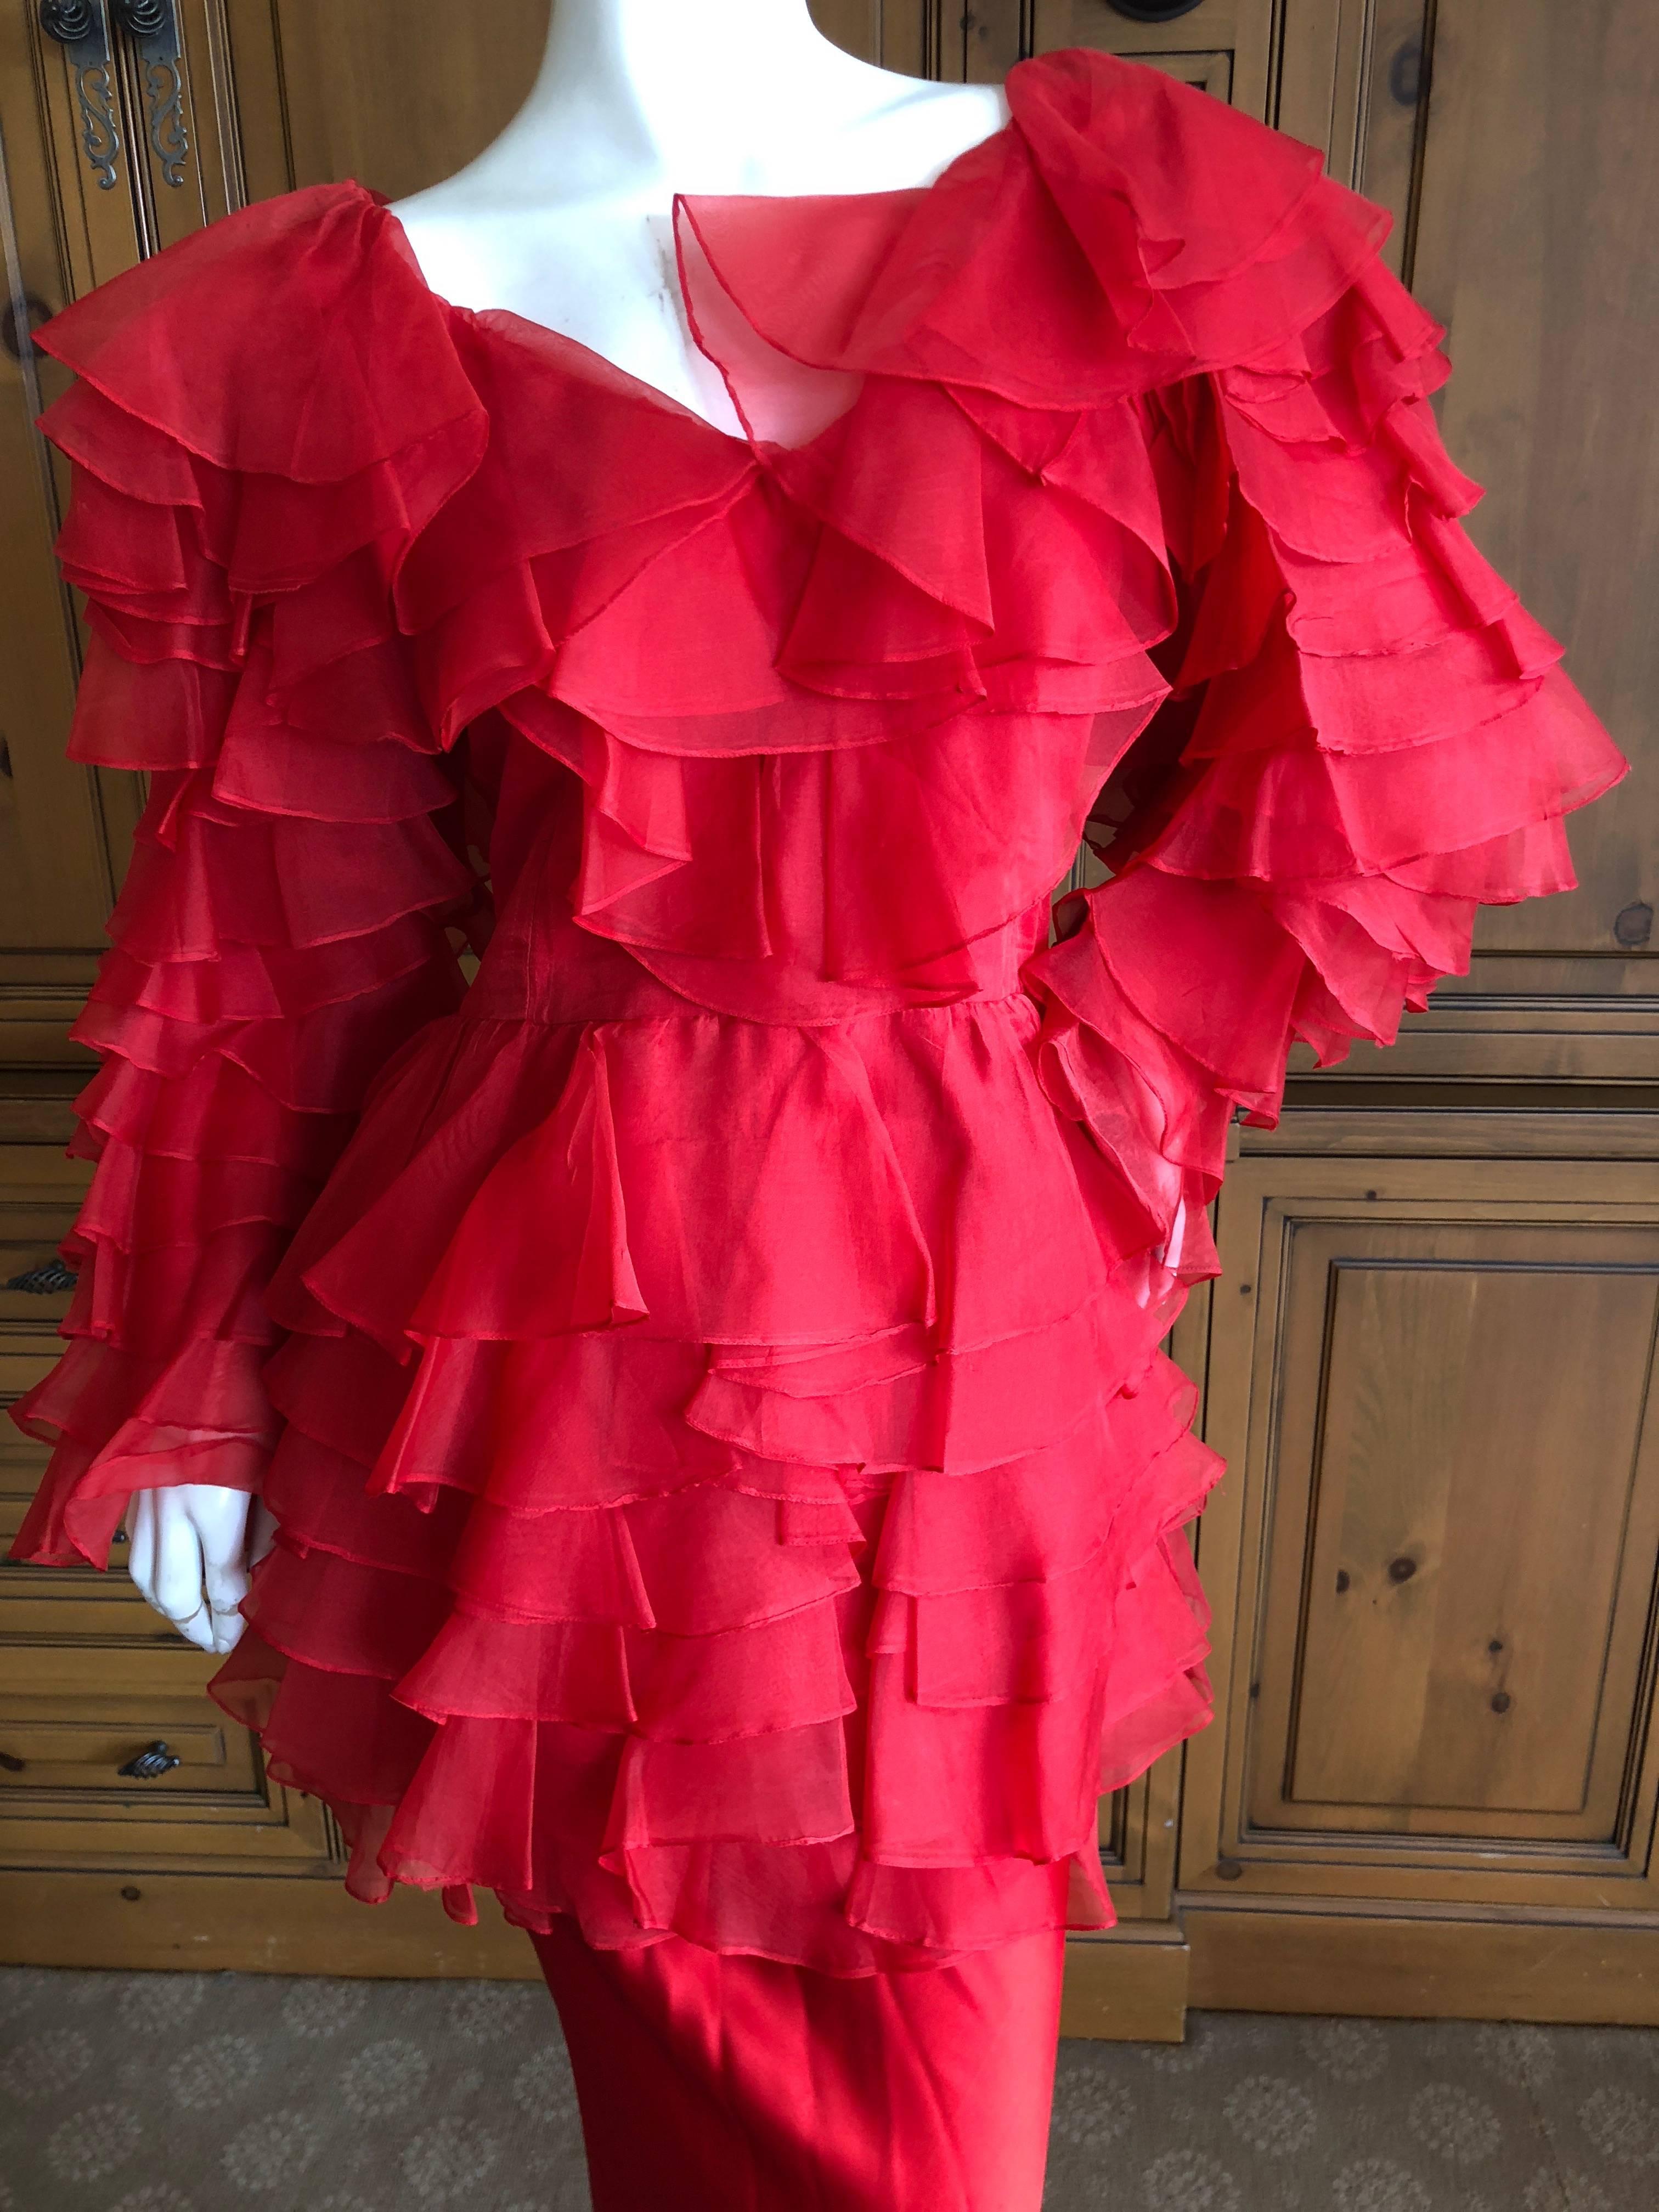 Cardinali 1970s Scarlet Red Ruffled Top and Bias Cut Silk Skirt with Fascinator.

From the Archive of Marilyn Lewis, the creator of Cardinali
Cardinali was founded in Los Angeles in 1970, by Marilyn Lewis, who had already found success as the